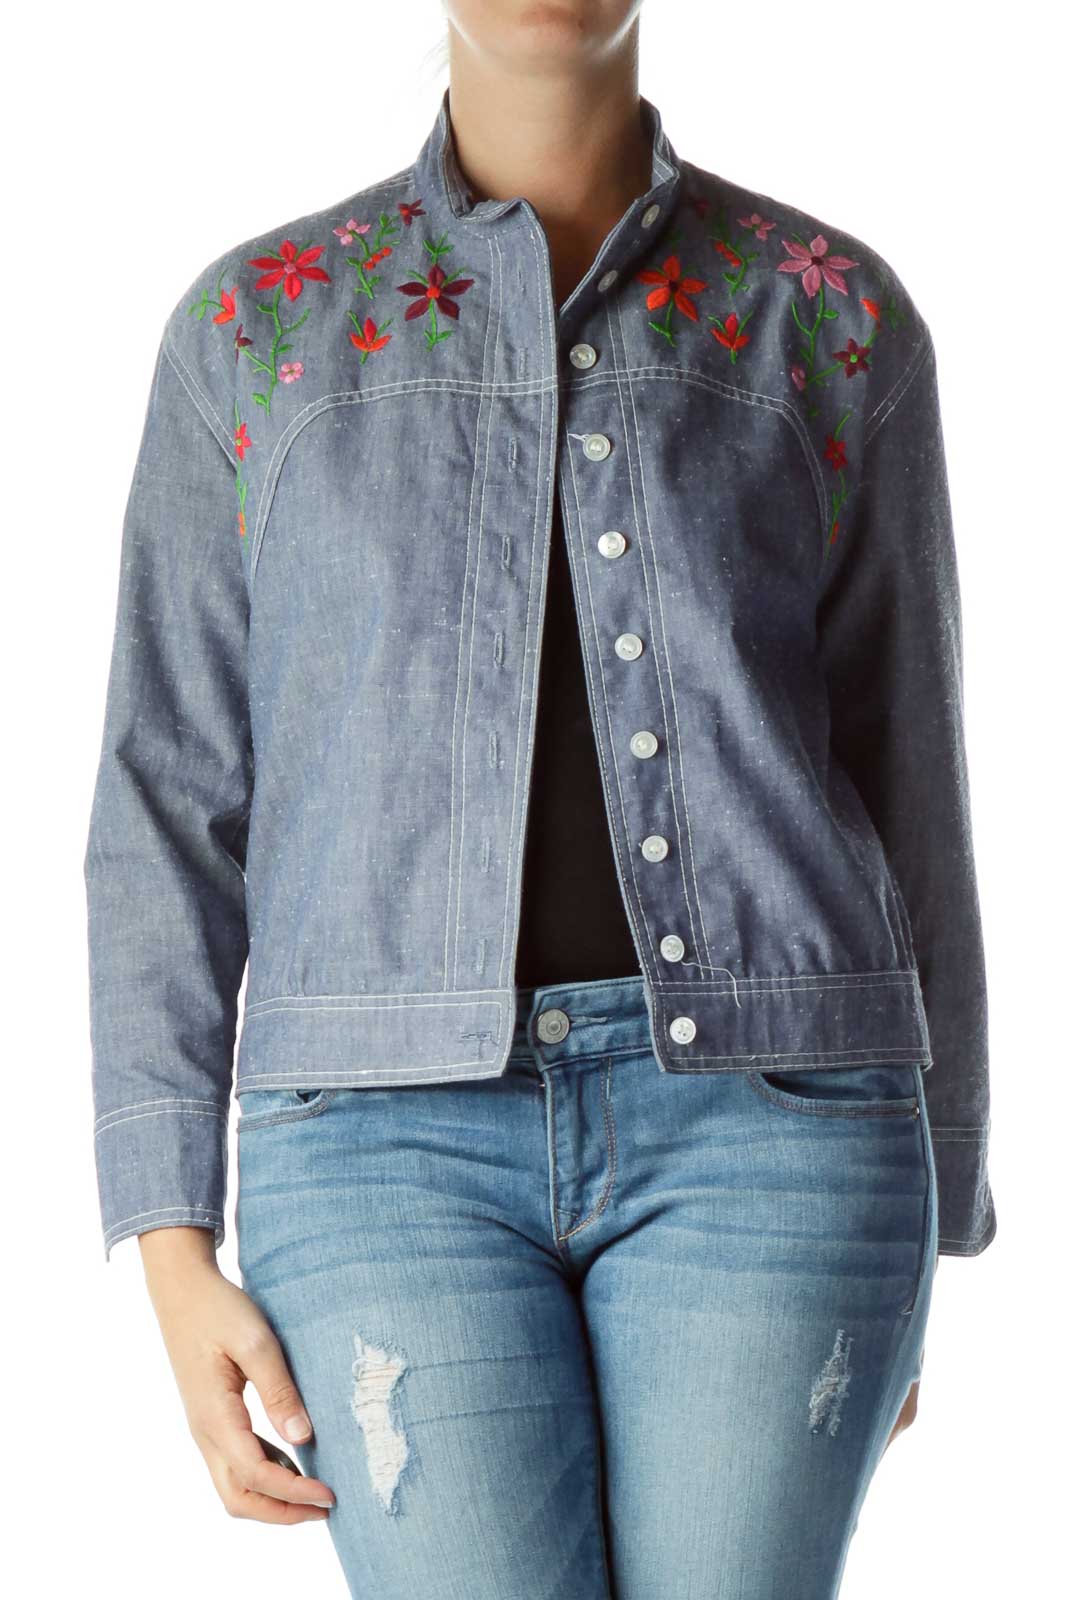 Blue Embroidered Shirt Front